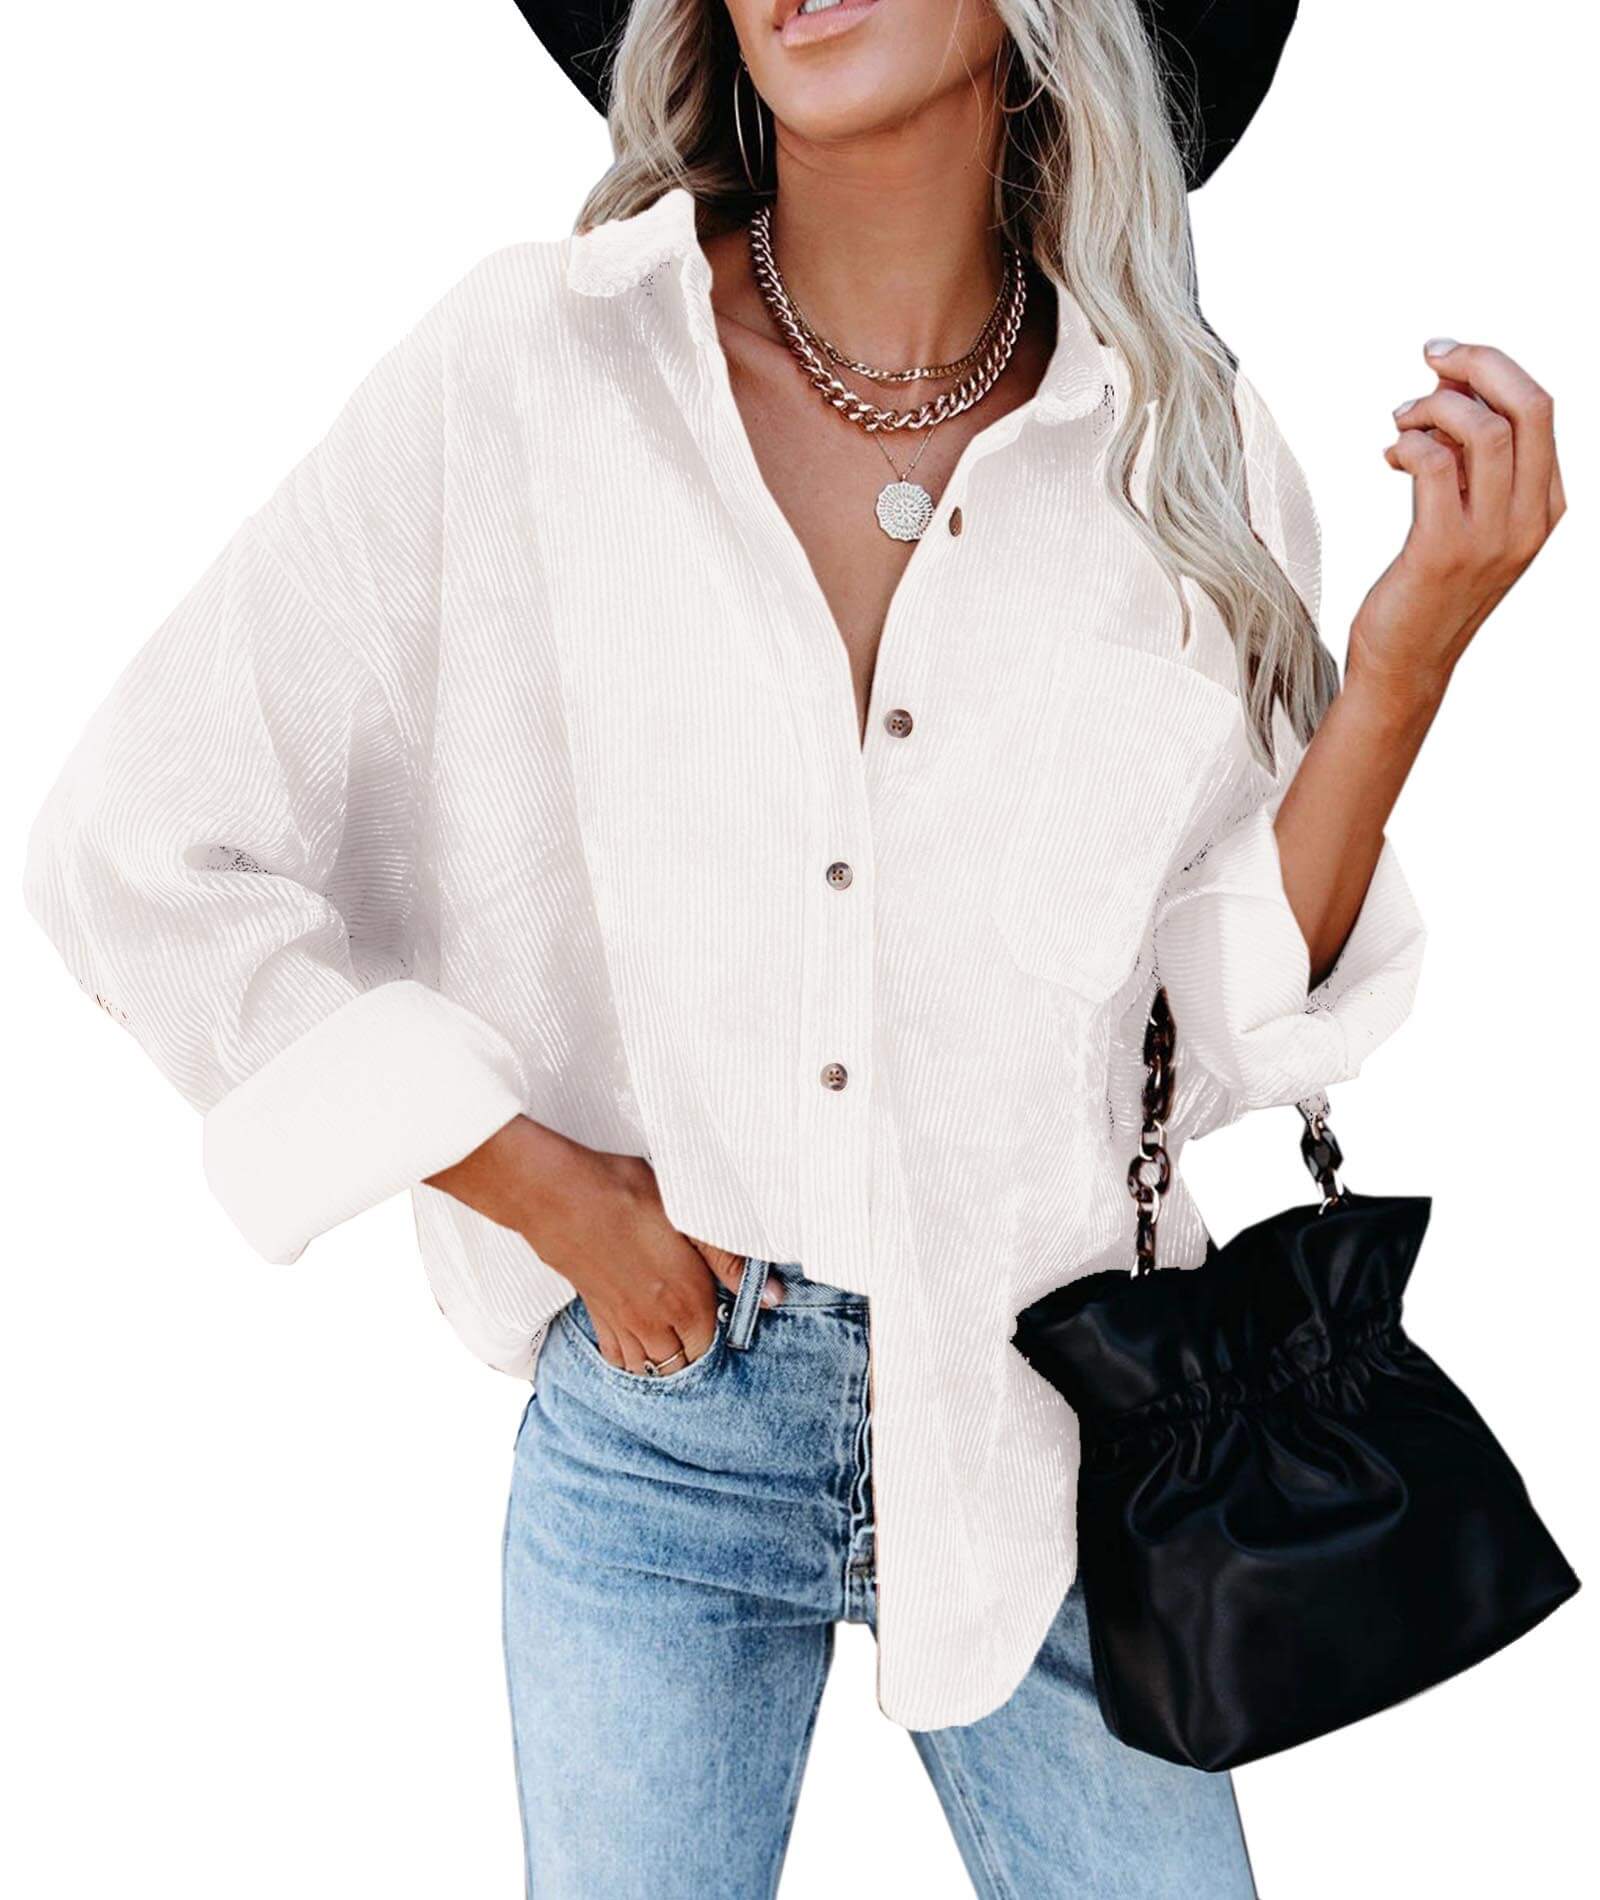  Women's Corduroy Blouse Top Long Sleeve Casual Cotton Chest Pocket Oversized Button Down Shirt Jacket